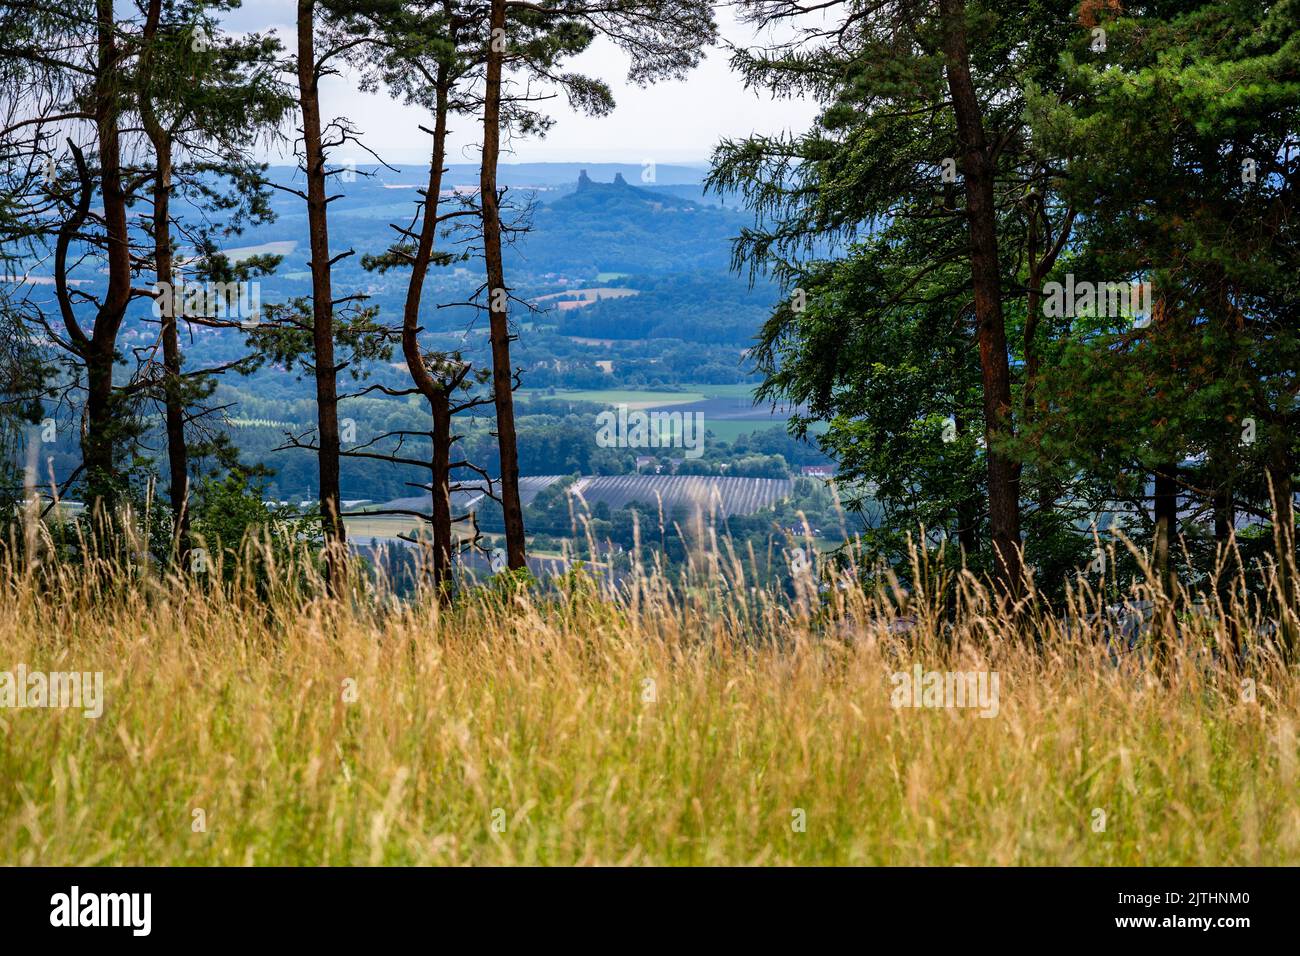 Distant view of ruin of medieval castle Trosky on horizon, view through the trees from mountain meadow on hill Varta. Czech Paradise, Czech republic. Stock Photo